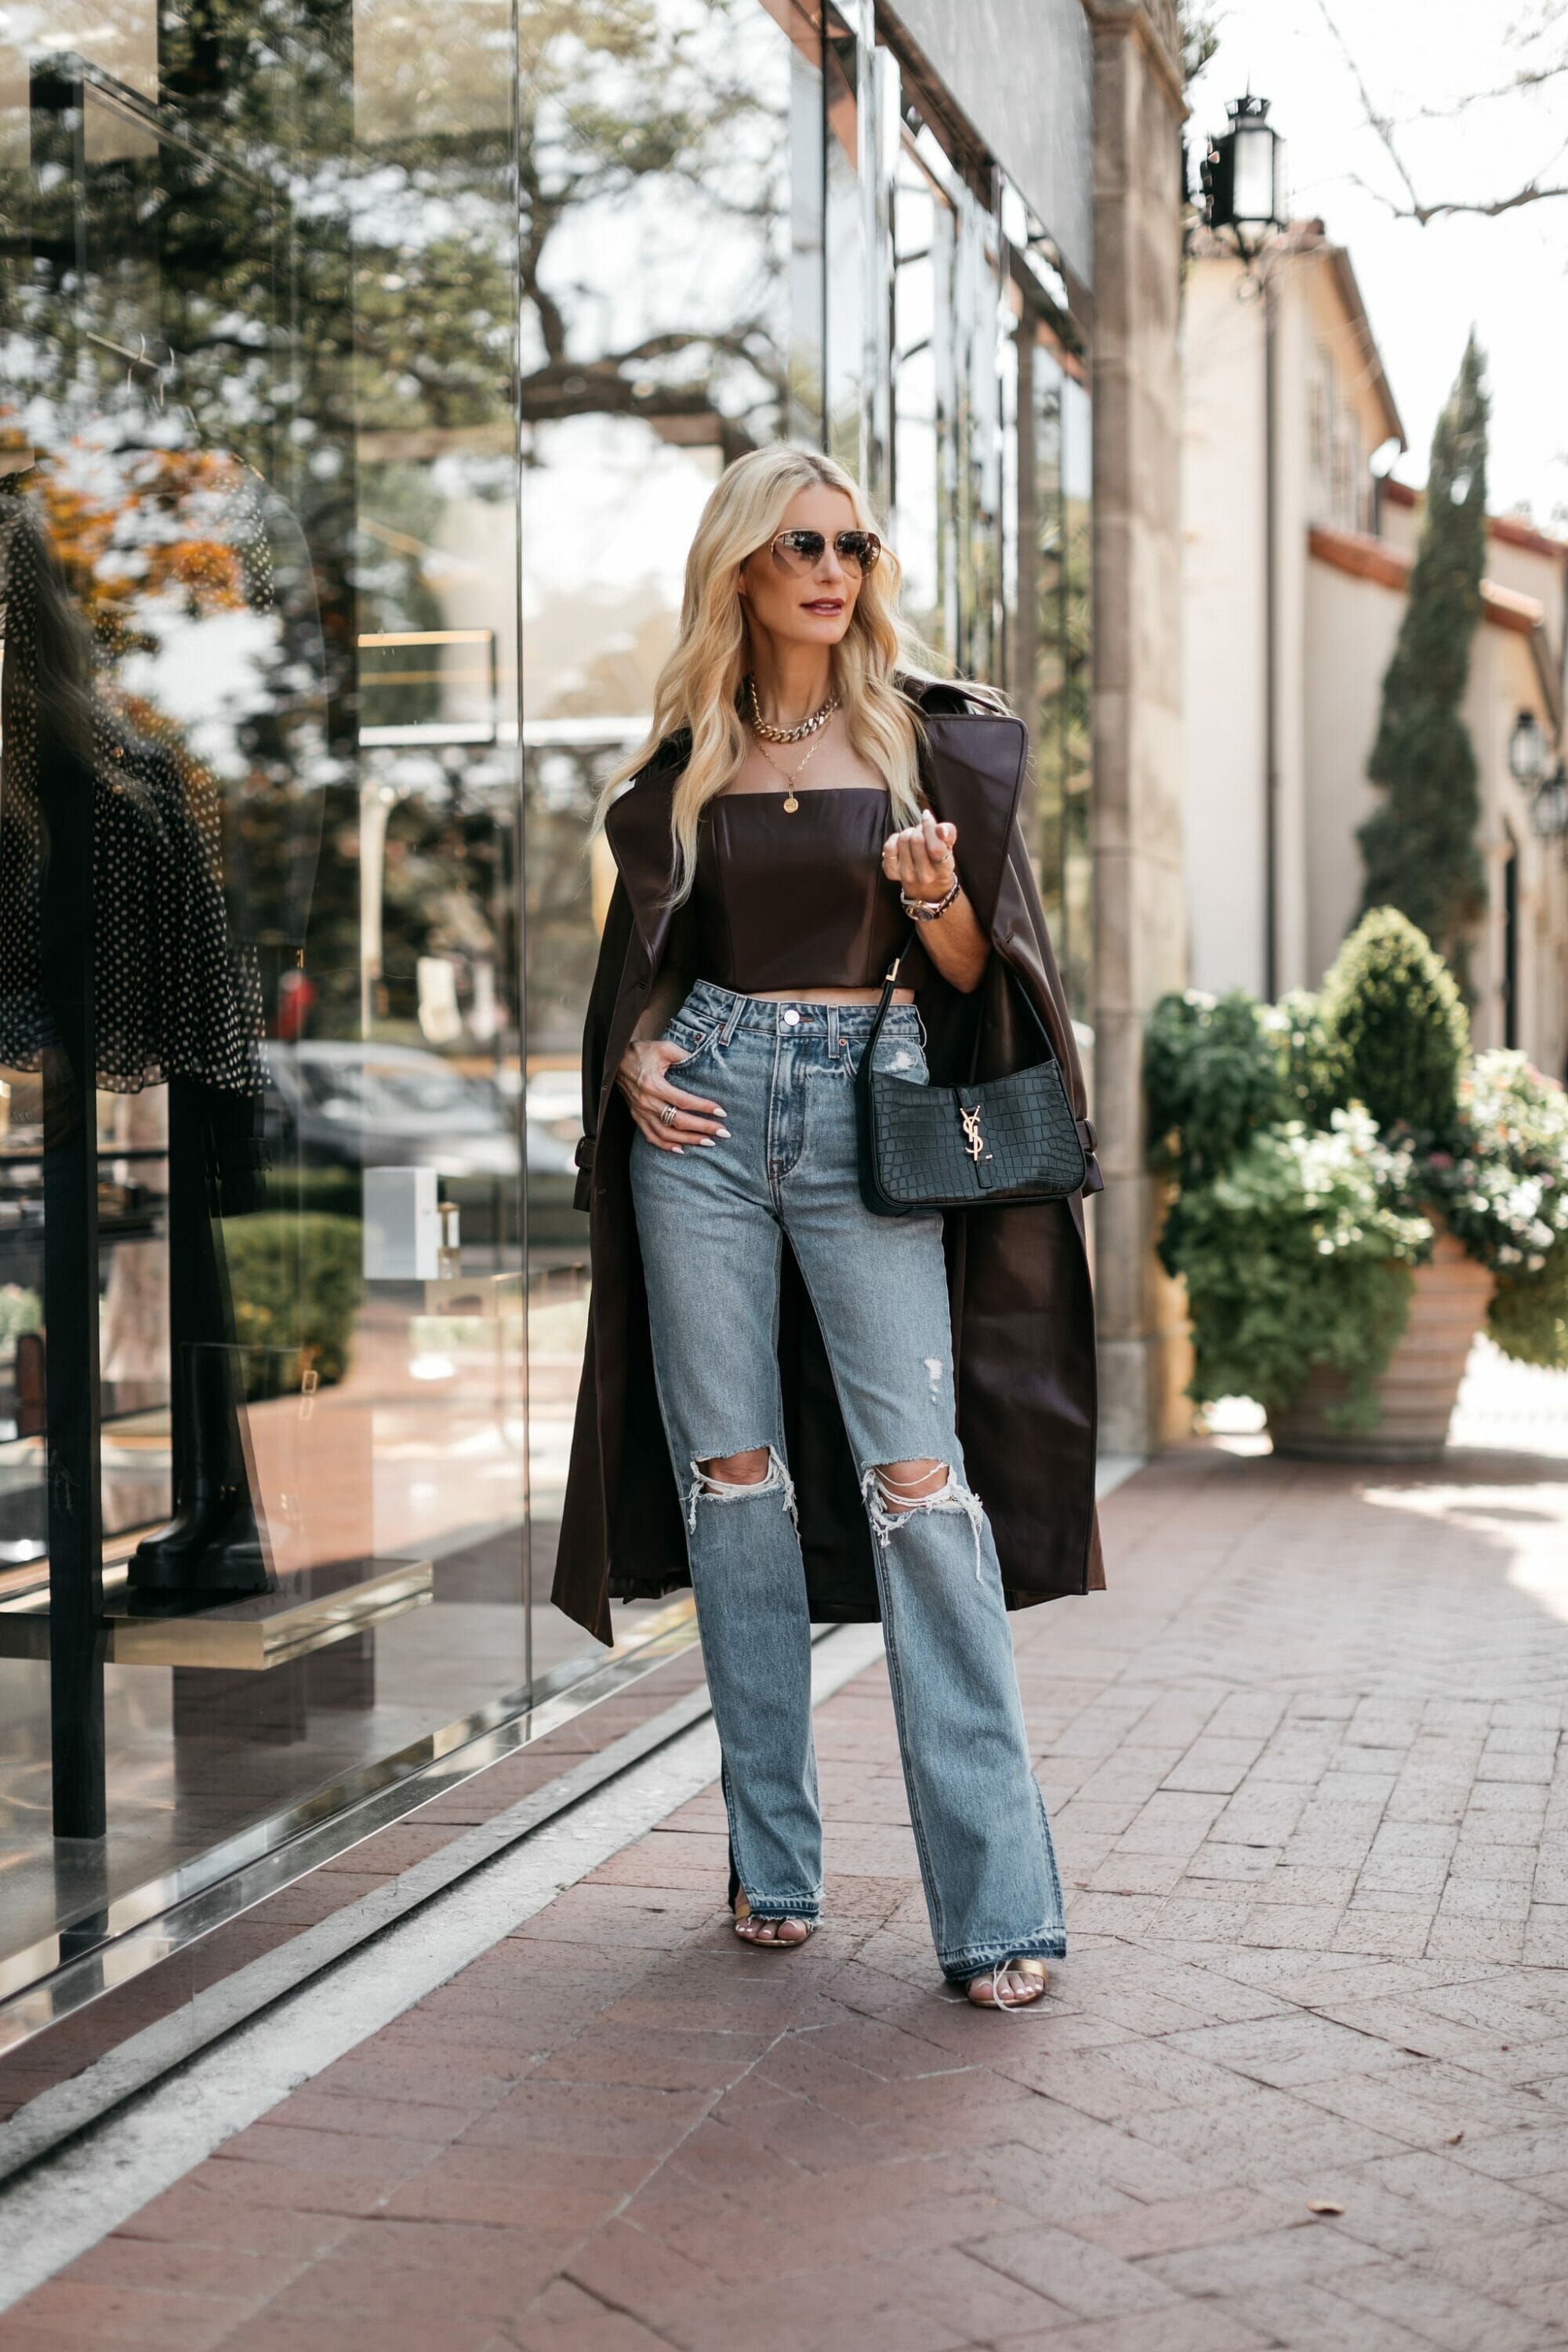 Over 40 fashion blogger showcasing her top 10 fall must-haves from the Saks friends and family sale.